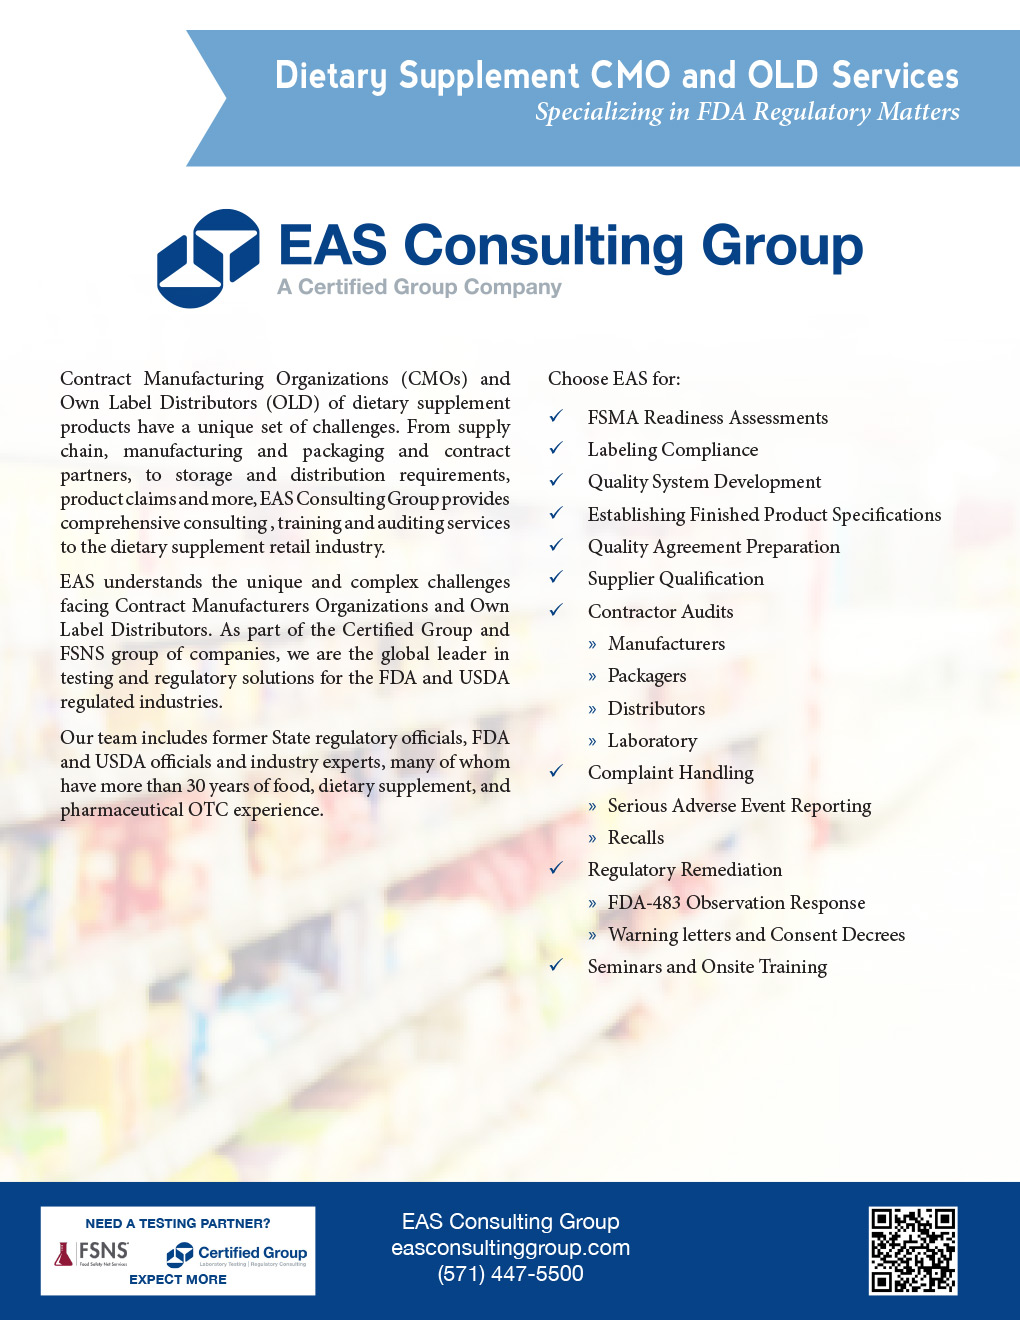 https://easconsultinggroup.com/wp-content/uploads/2022/09/image-Dietary-Supplement-CMO-and-OLD-Services-EAS-Consulting-Group.jpg